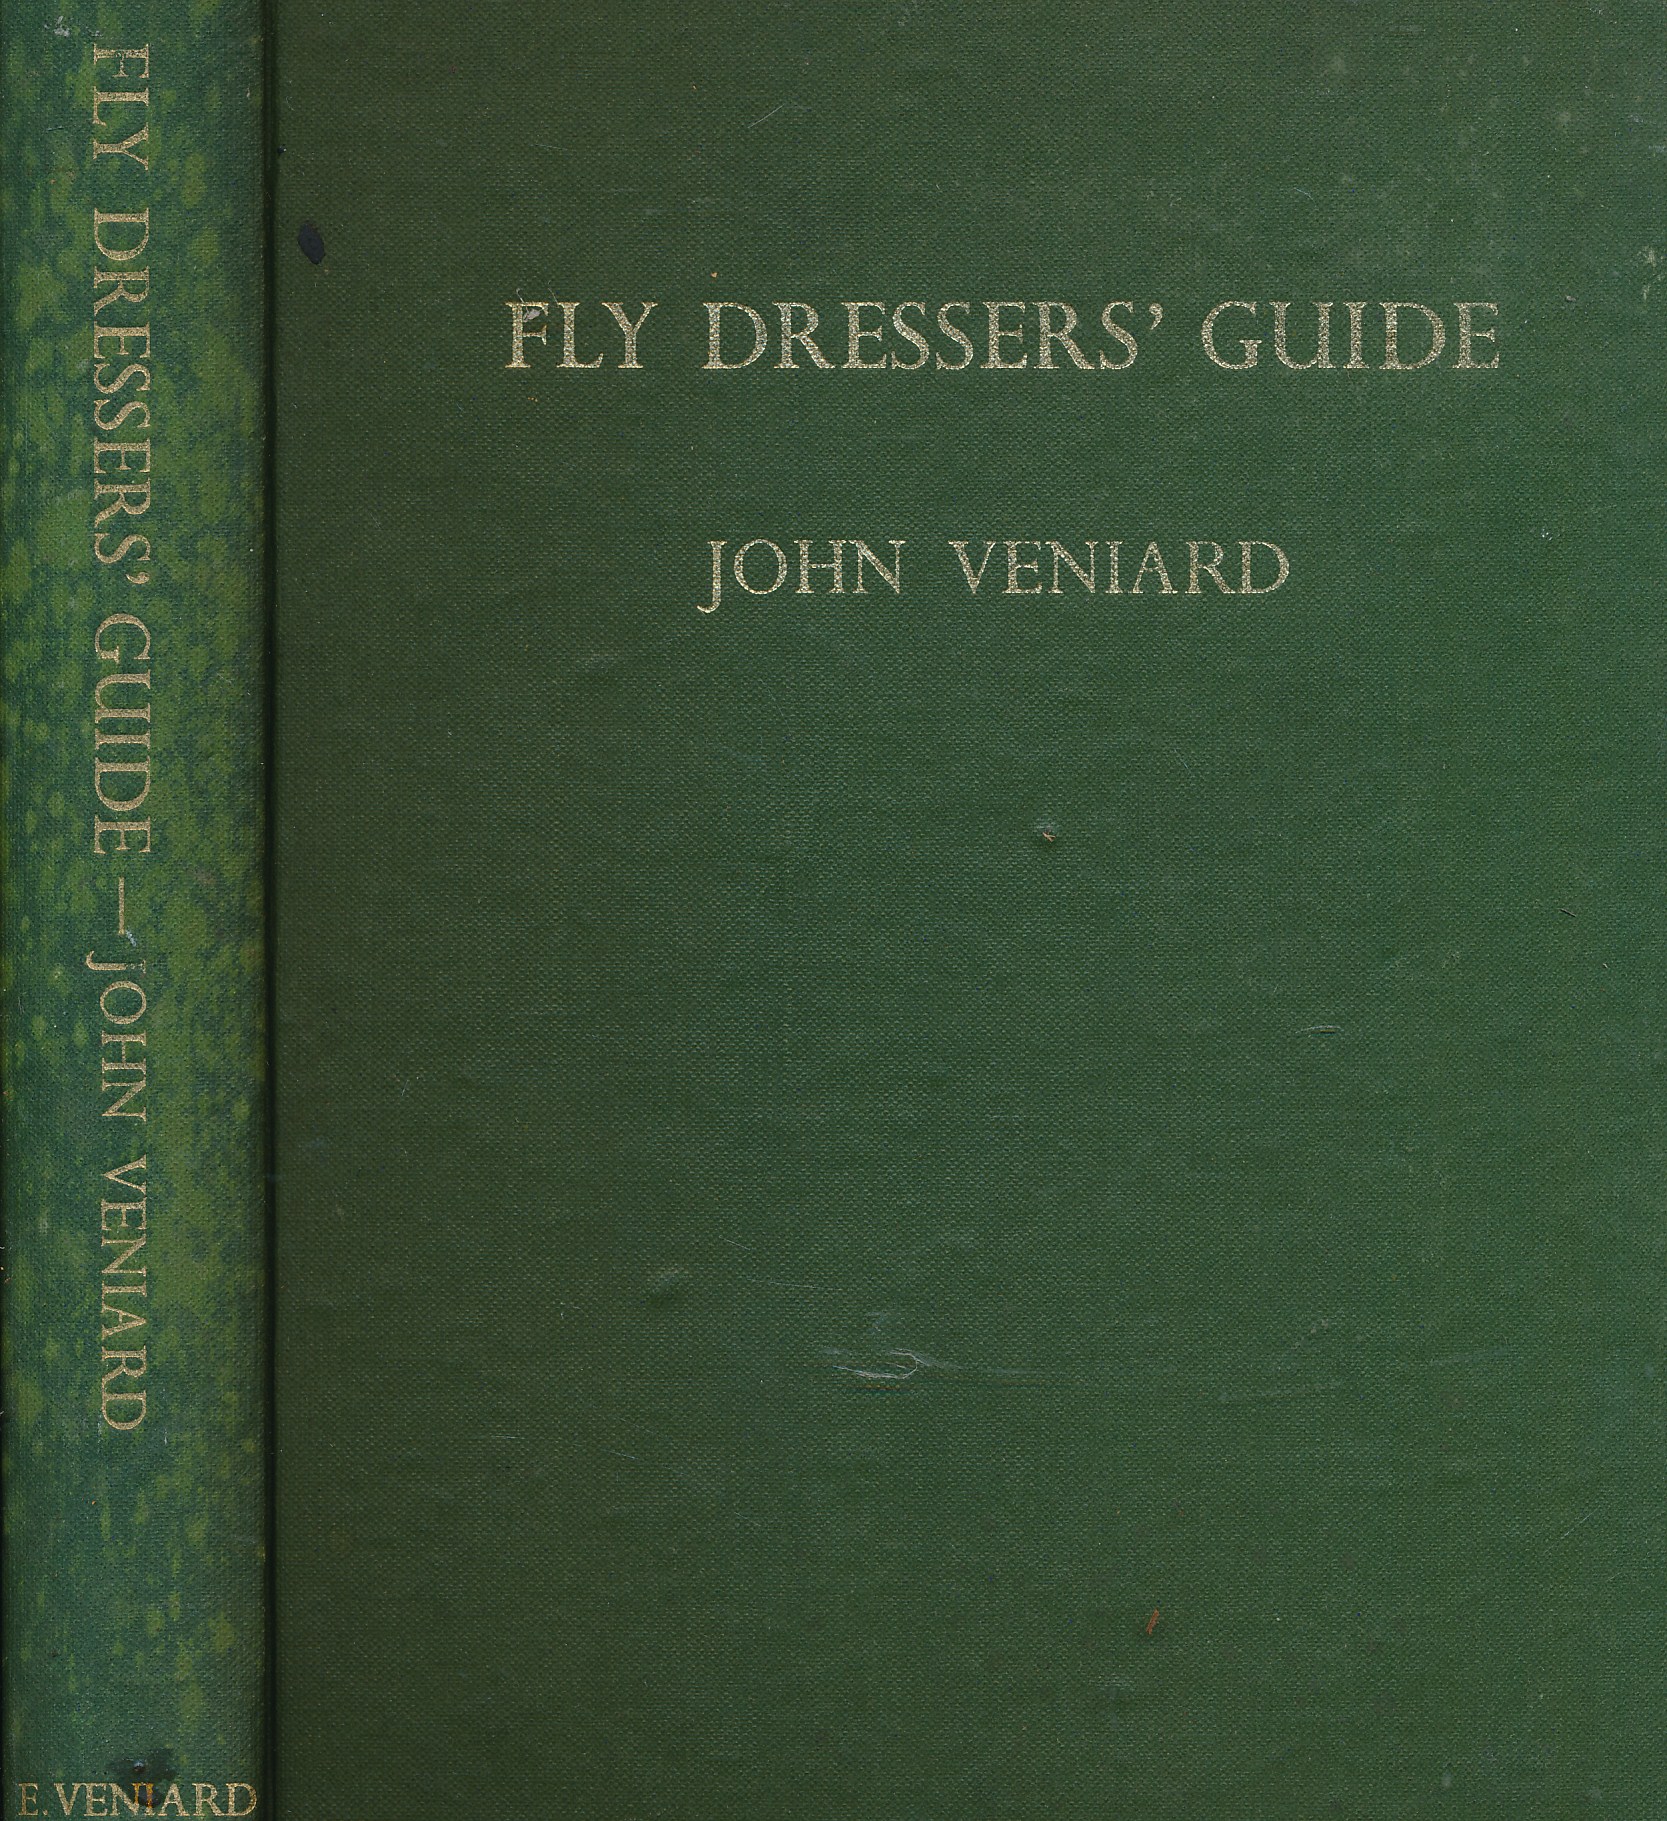 Fly Dressers' Guide. 1952.